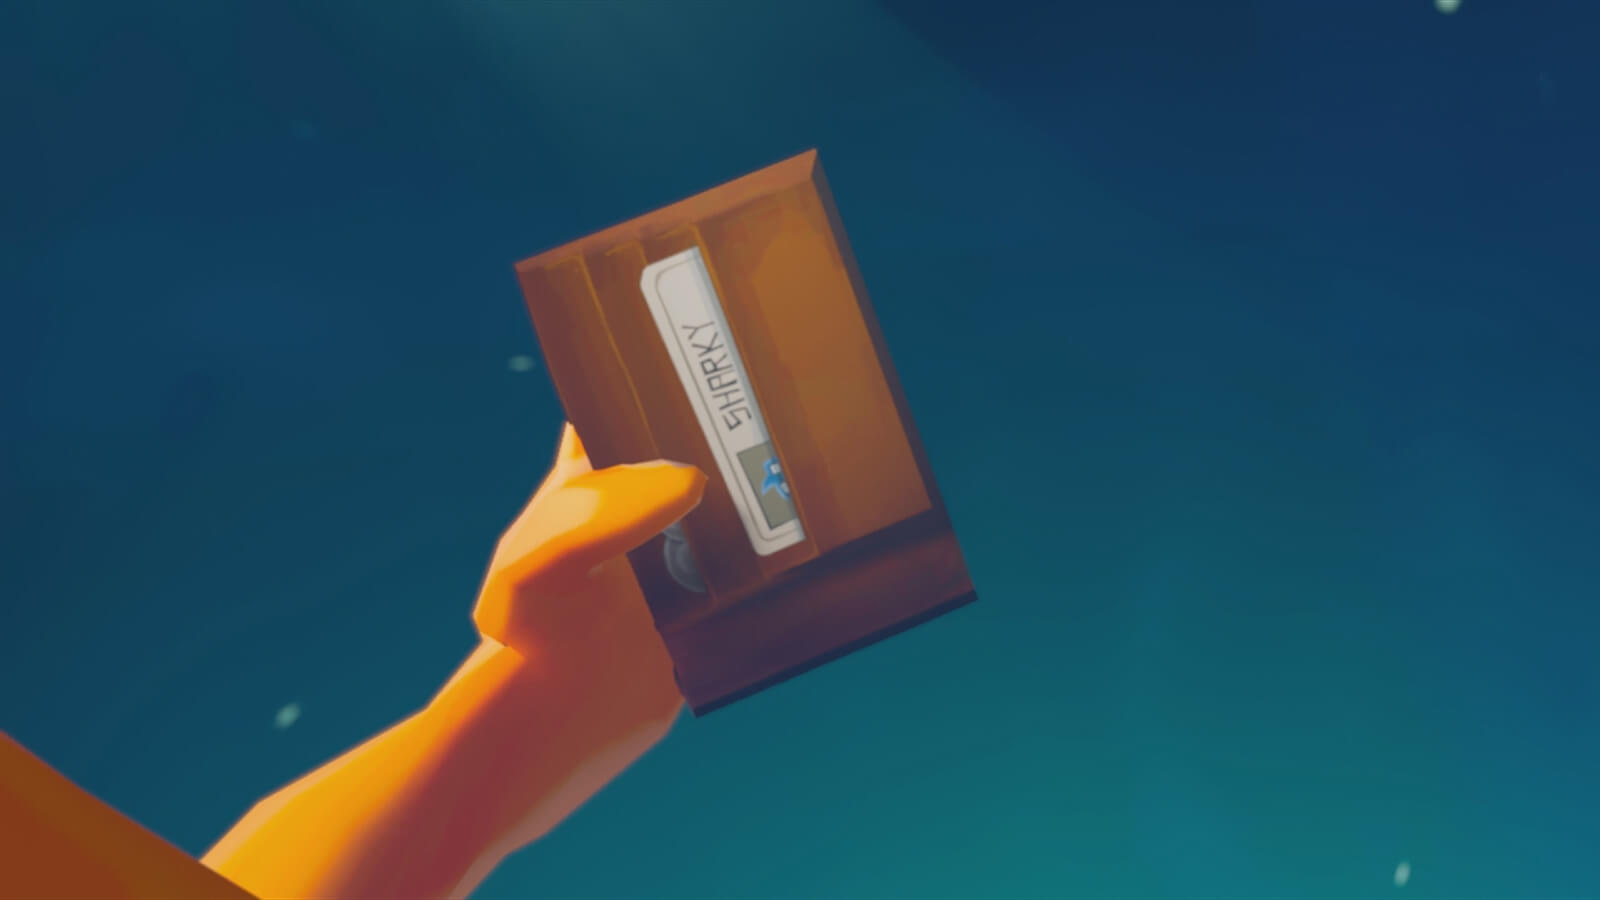 An orange hand holds out a brown wallet. An ID card with the name "Sharky" can be seen inside.